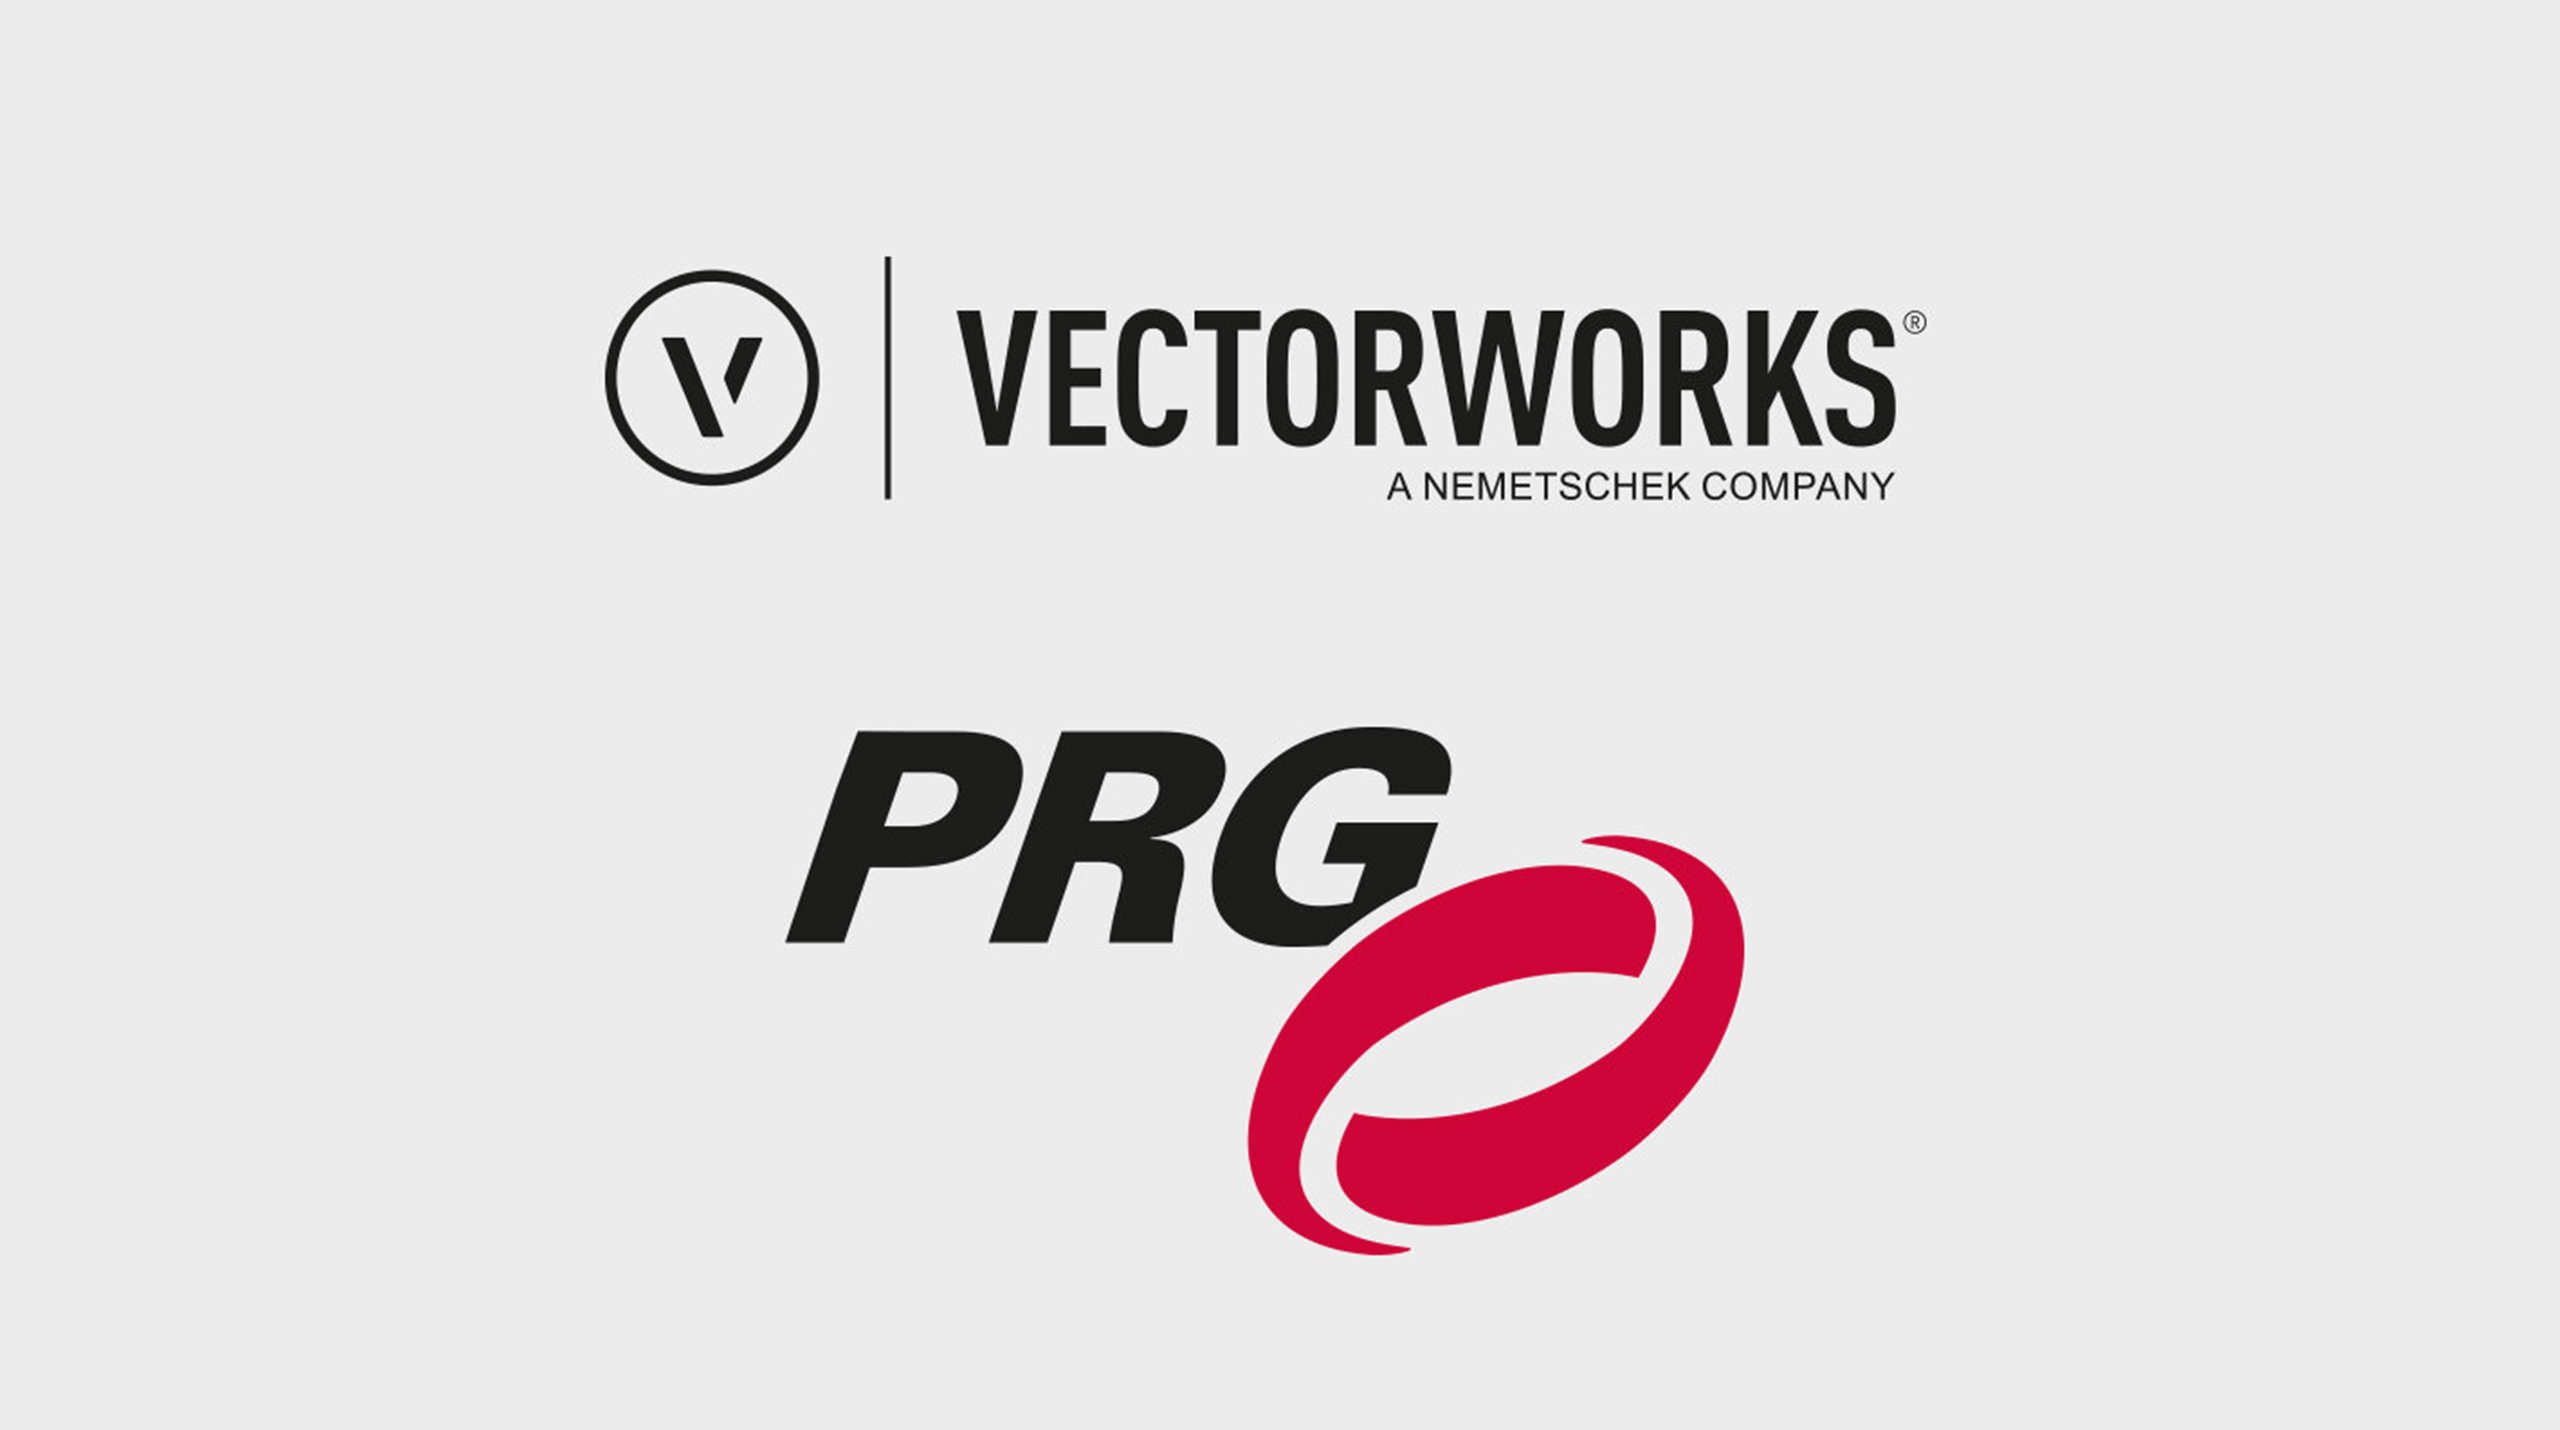 Logo Vectorworks Inc. und Production Research Group (PRG)